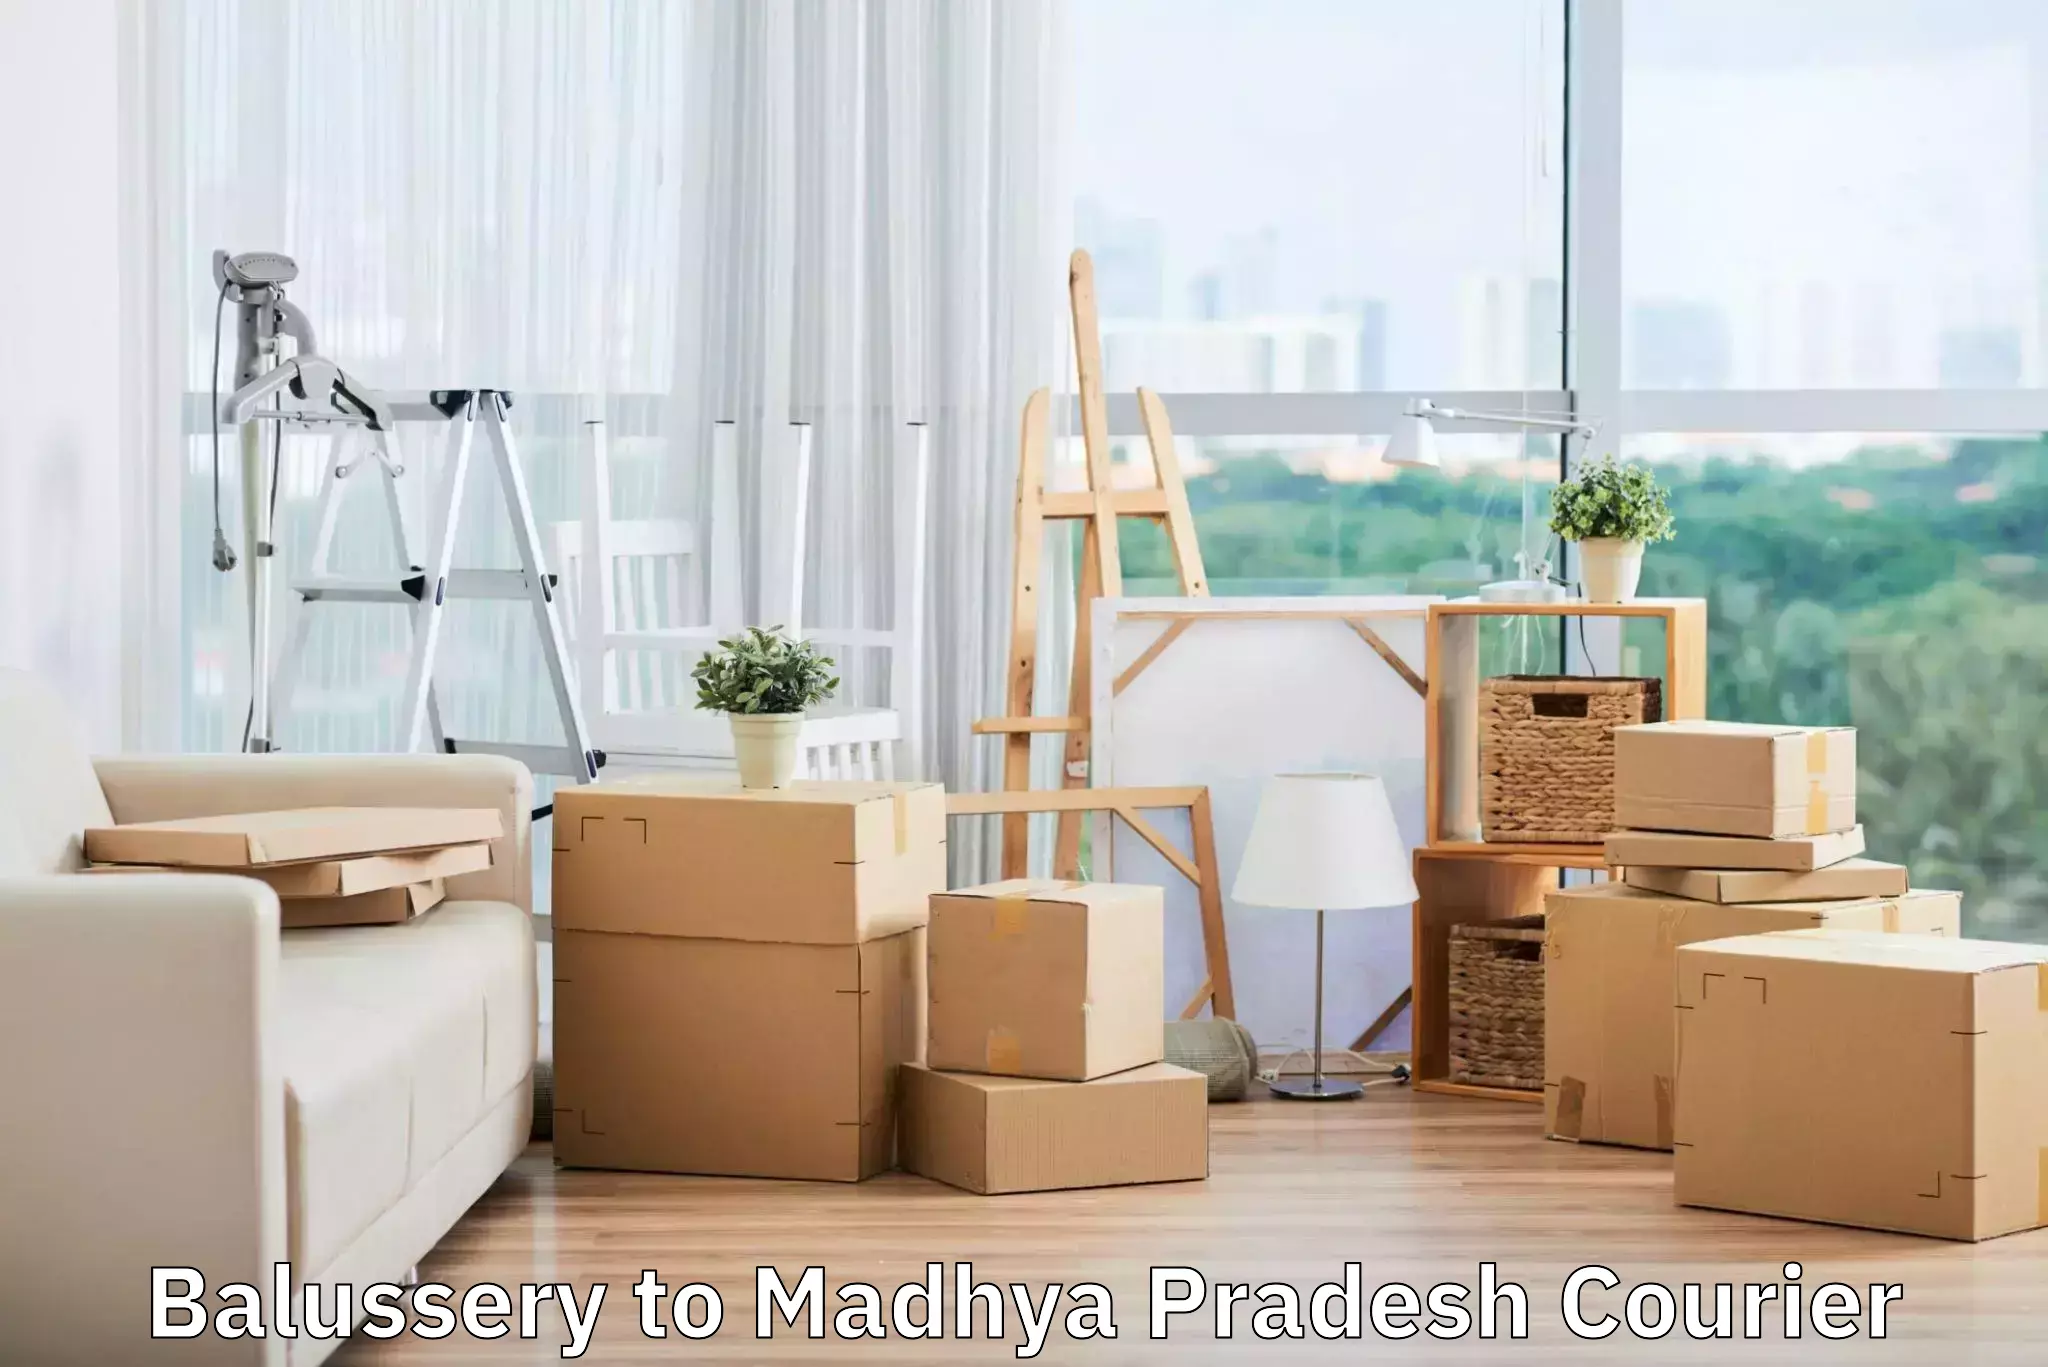 Online luggage shipping booking Balussery to Raipur Karchuliyan